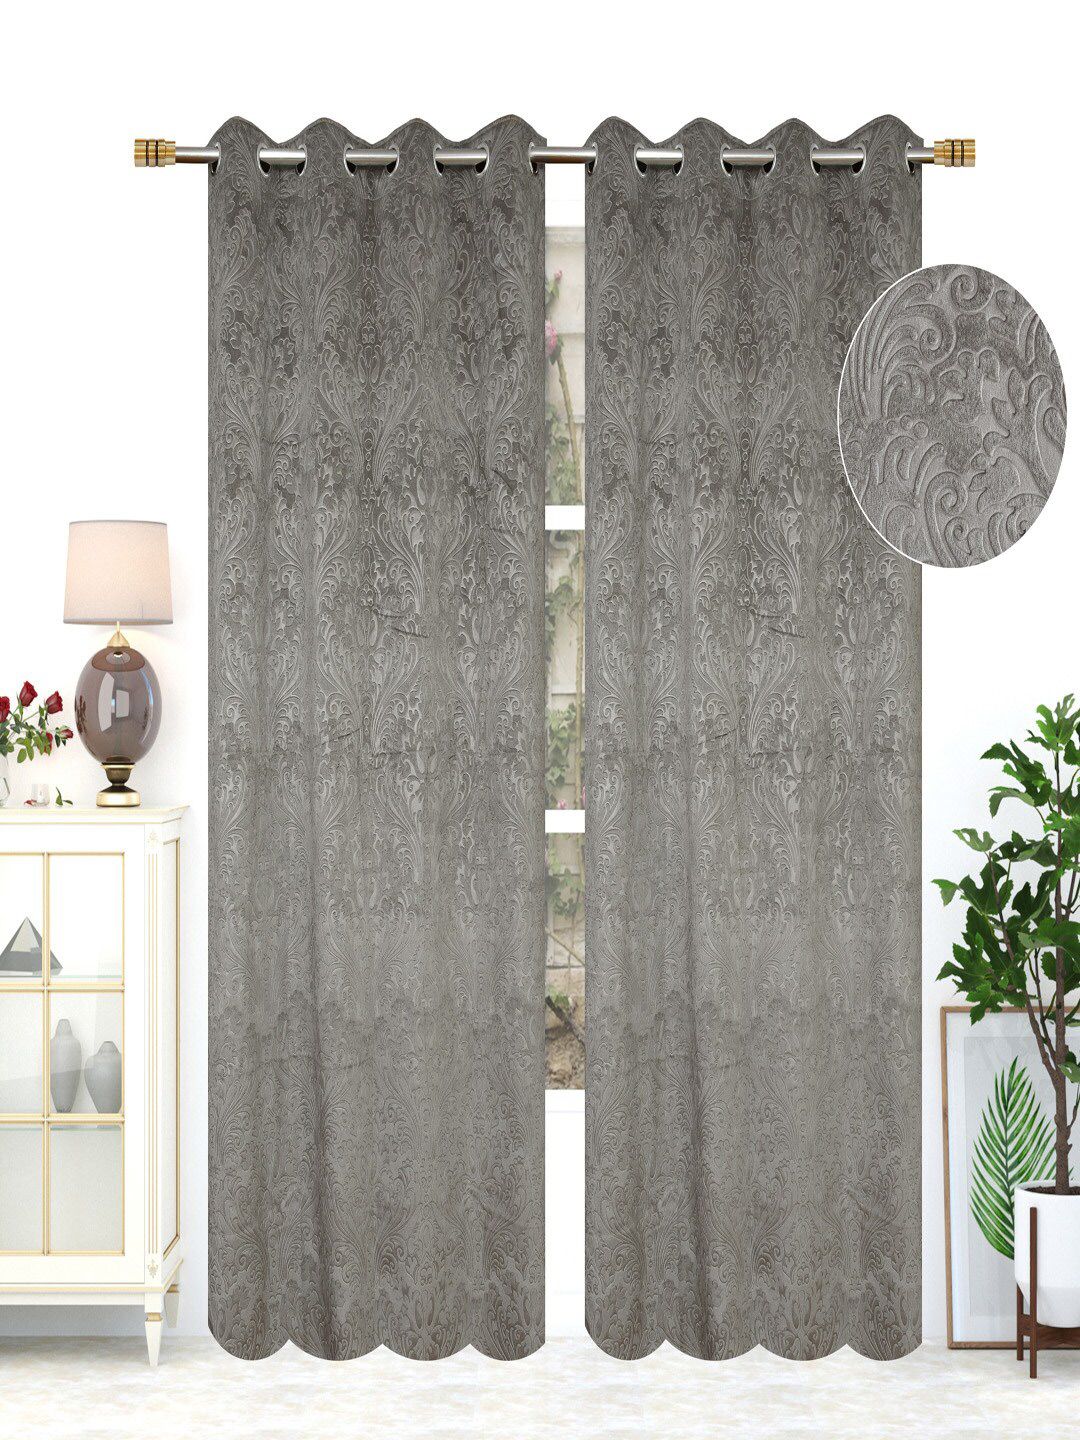 MULTITEX Grey Set of 2 Floral Window Curtain Price in India